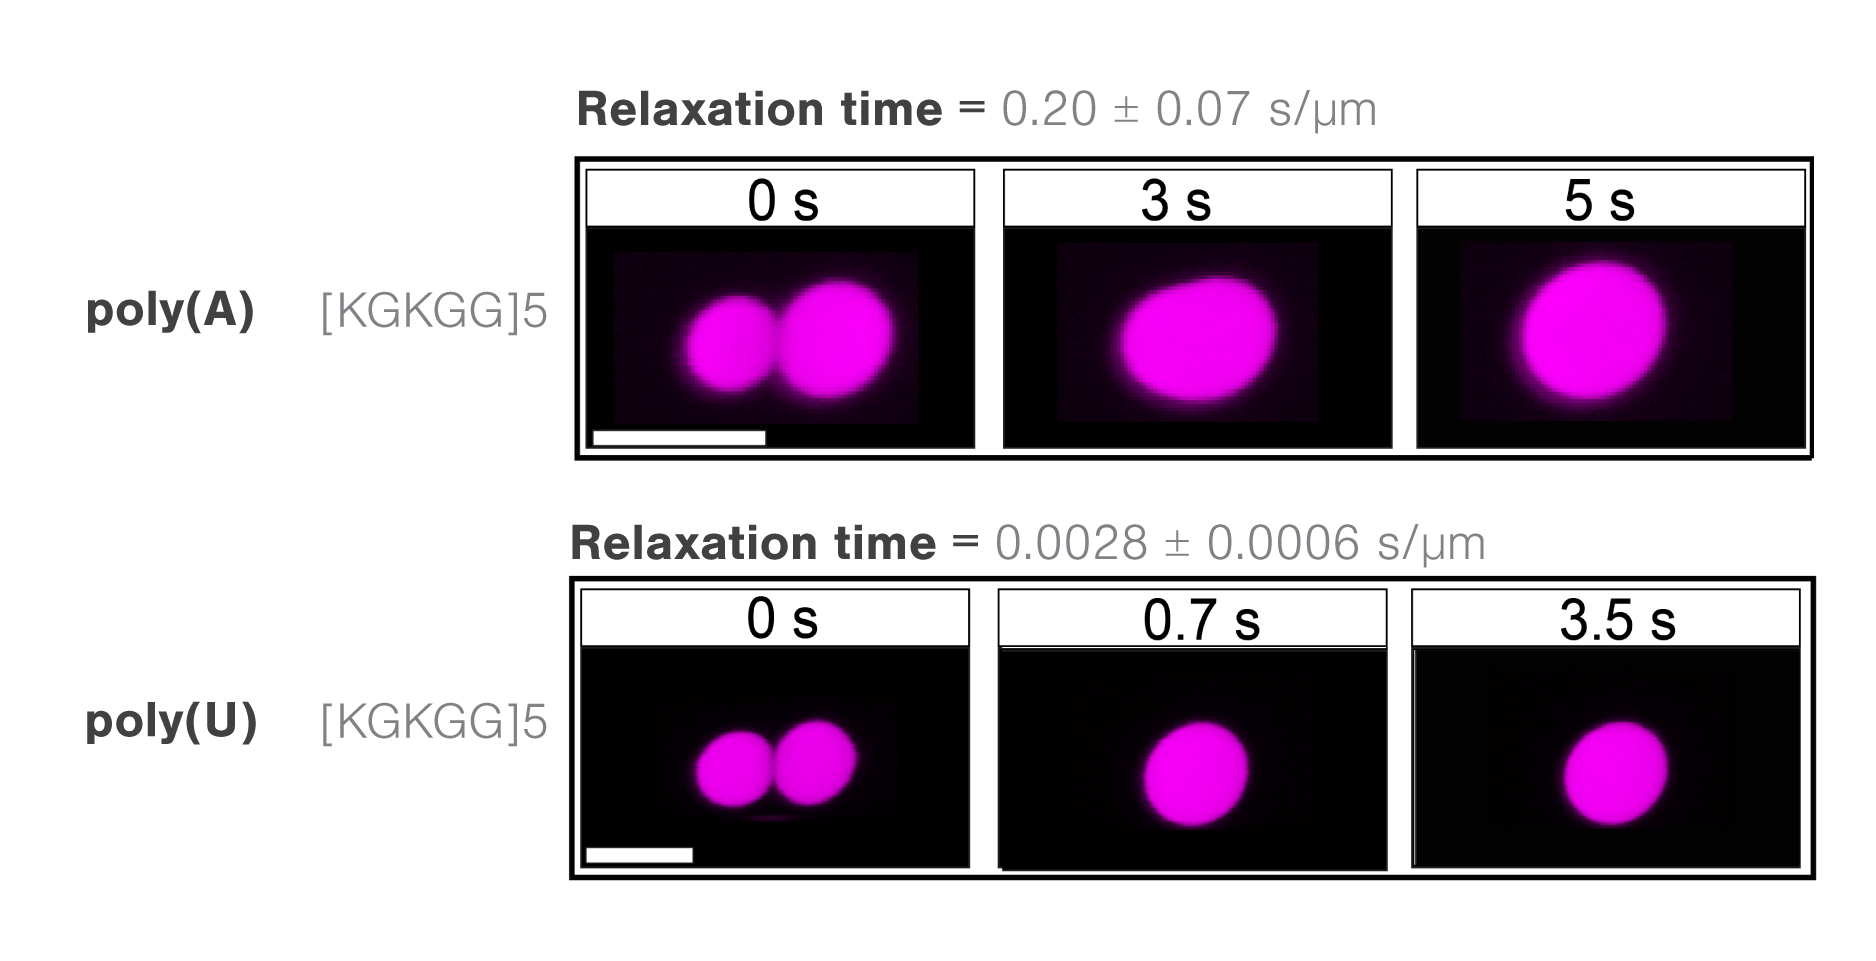 Timelapse images comparing times to relaxation of different RNA RNP complexes during optical trap induced droplet fusion v2